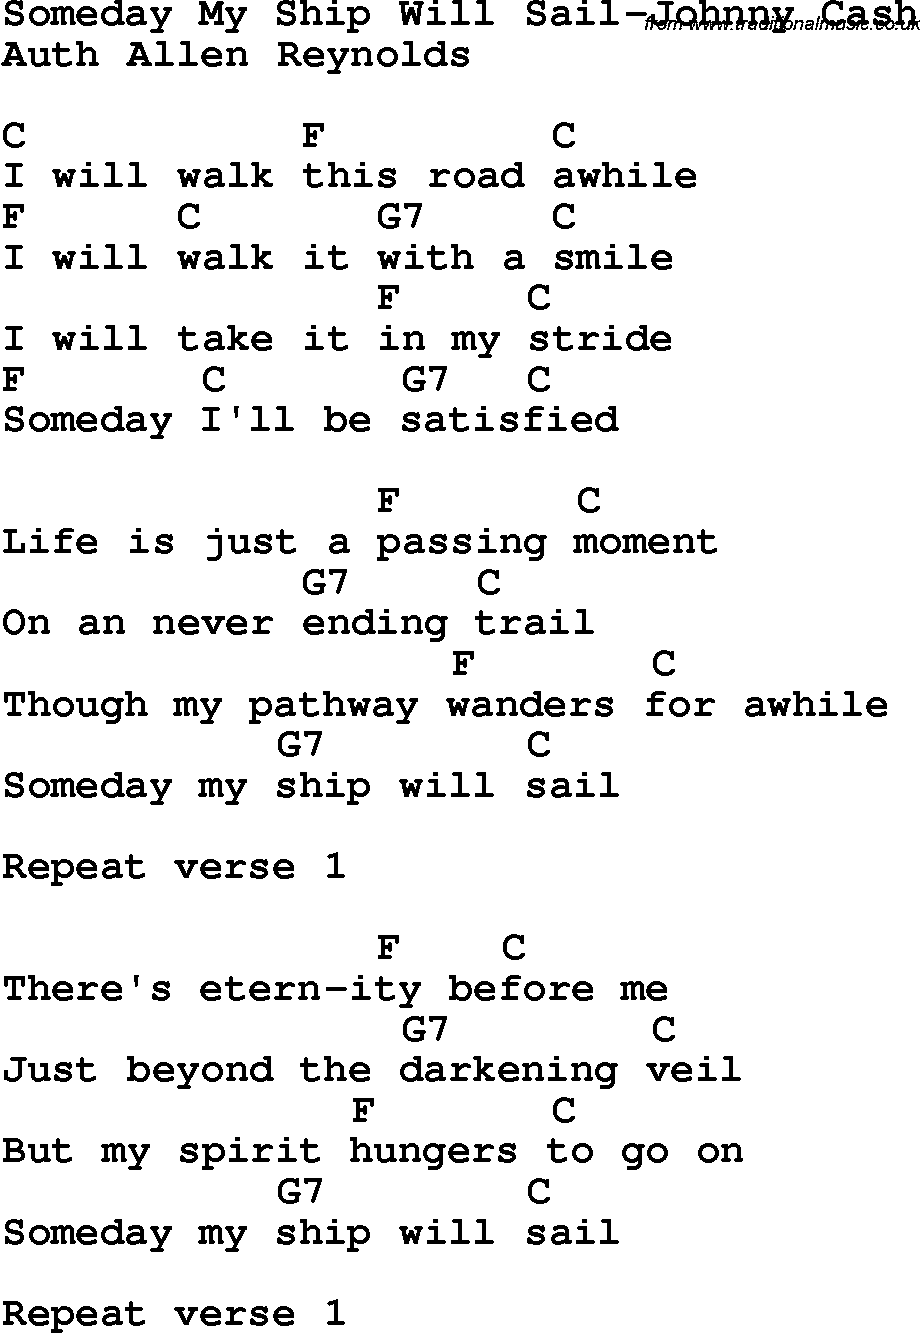 Country, Southern and Bluegrass Gospel Song Someday My Ship Will Sail-Johnny Cash lyrics and chords